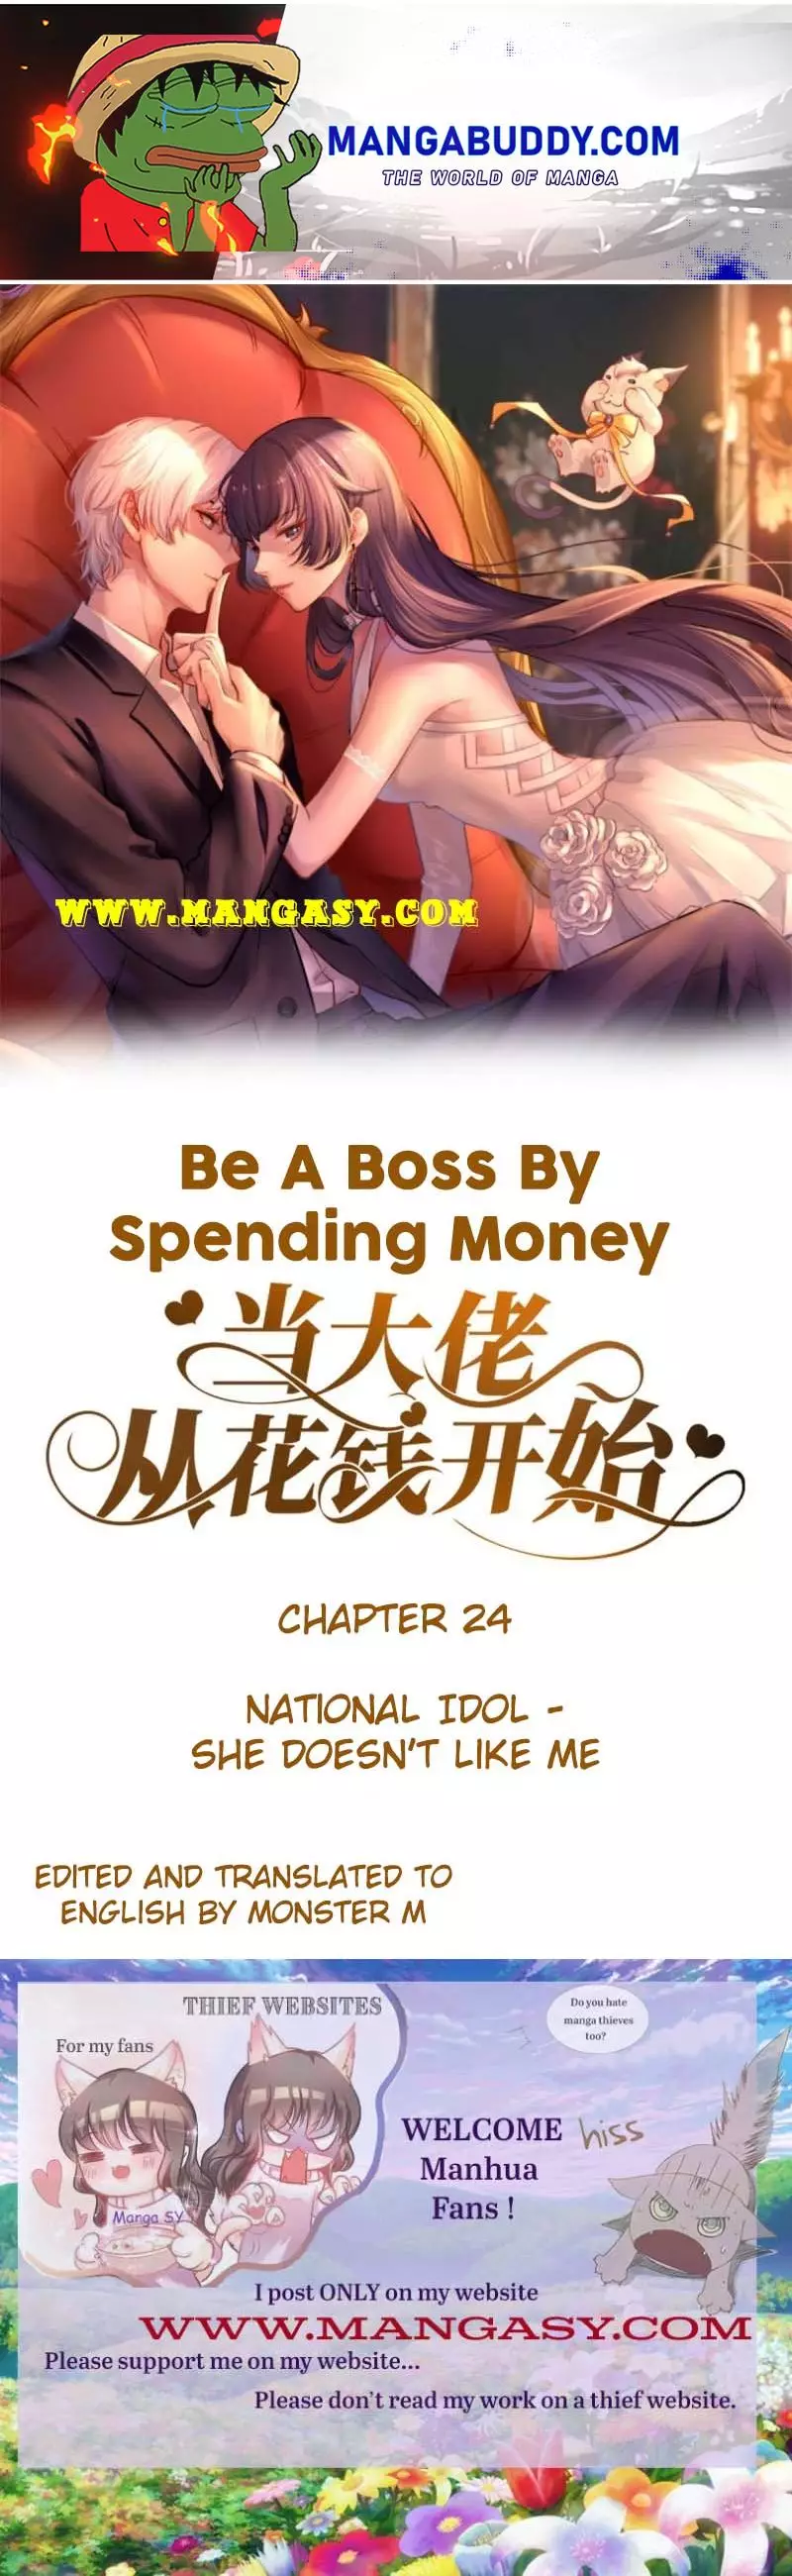 Becoming A Big Boss Starts With Spending Money - 24 page 1-c5385a56